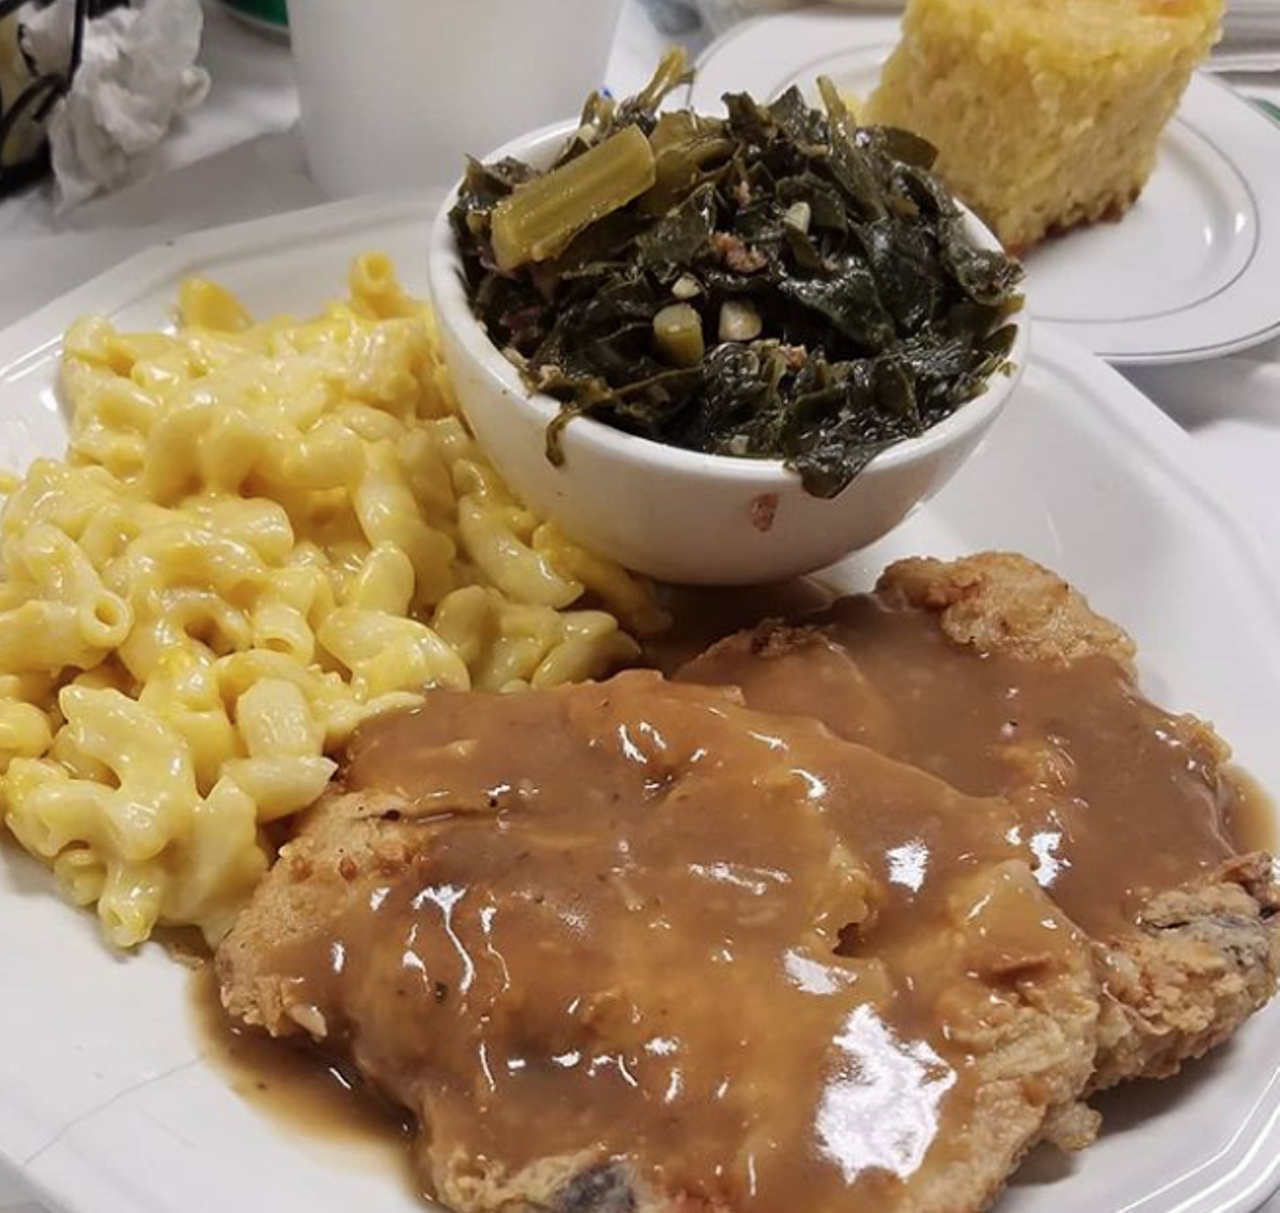 Mr. A Ok’s Kitchen
4403 Rittiman Road, (210) 642-4181, mraokskitchen.com
Chef Steven Harris has been active in SA’s food scene for more than two decades, and opened his restaurant in June 2018. Inspired to become a chef after seeing his mother and grandmother make from-scratch Southern fare, Harris today brings the cuisine to San Antonians with Mr. A Ok’s Kitchen, named after his late father. Expect the classics or go for something new, like the Grilled Cheese Meatloaf.
Photo via Instagram / ang_e210